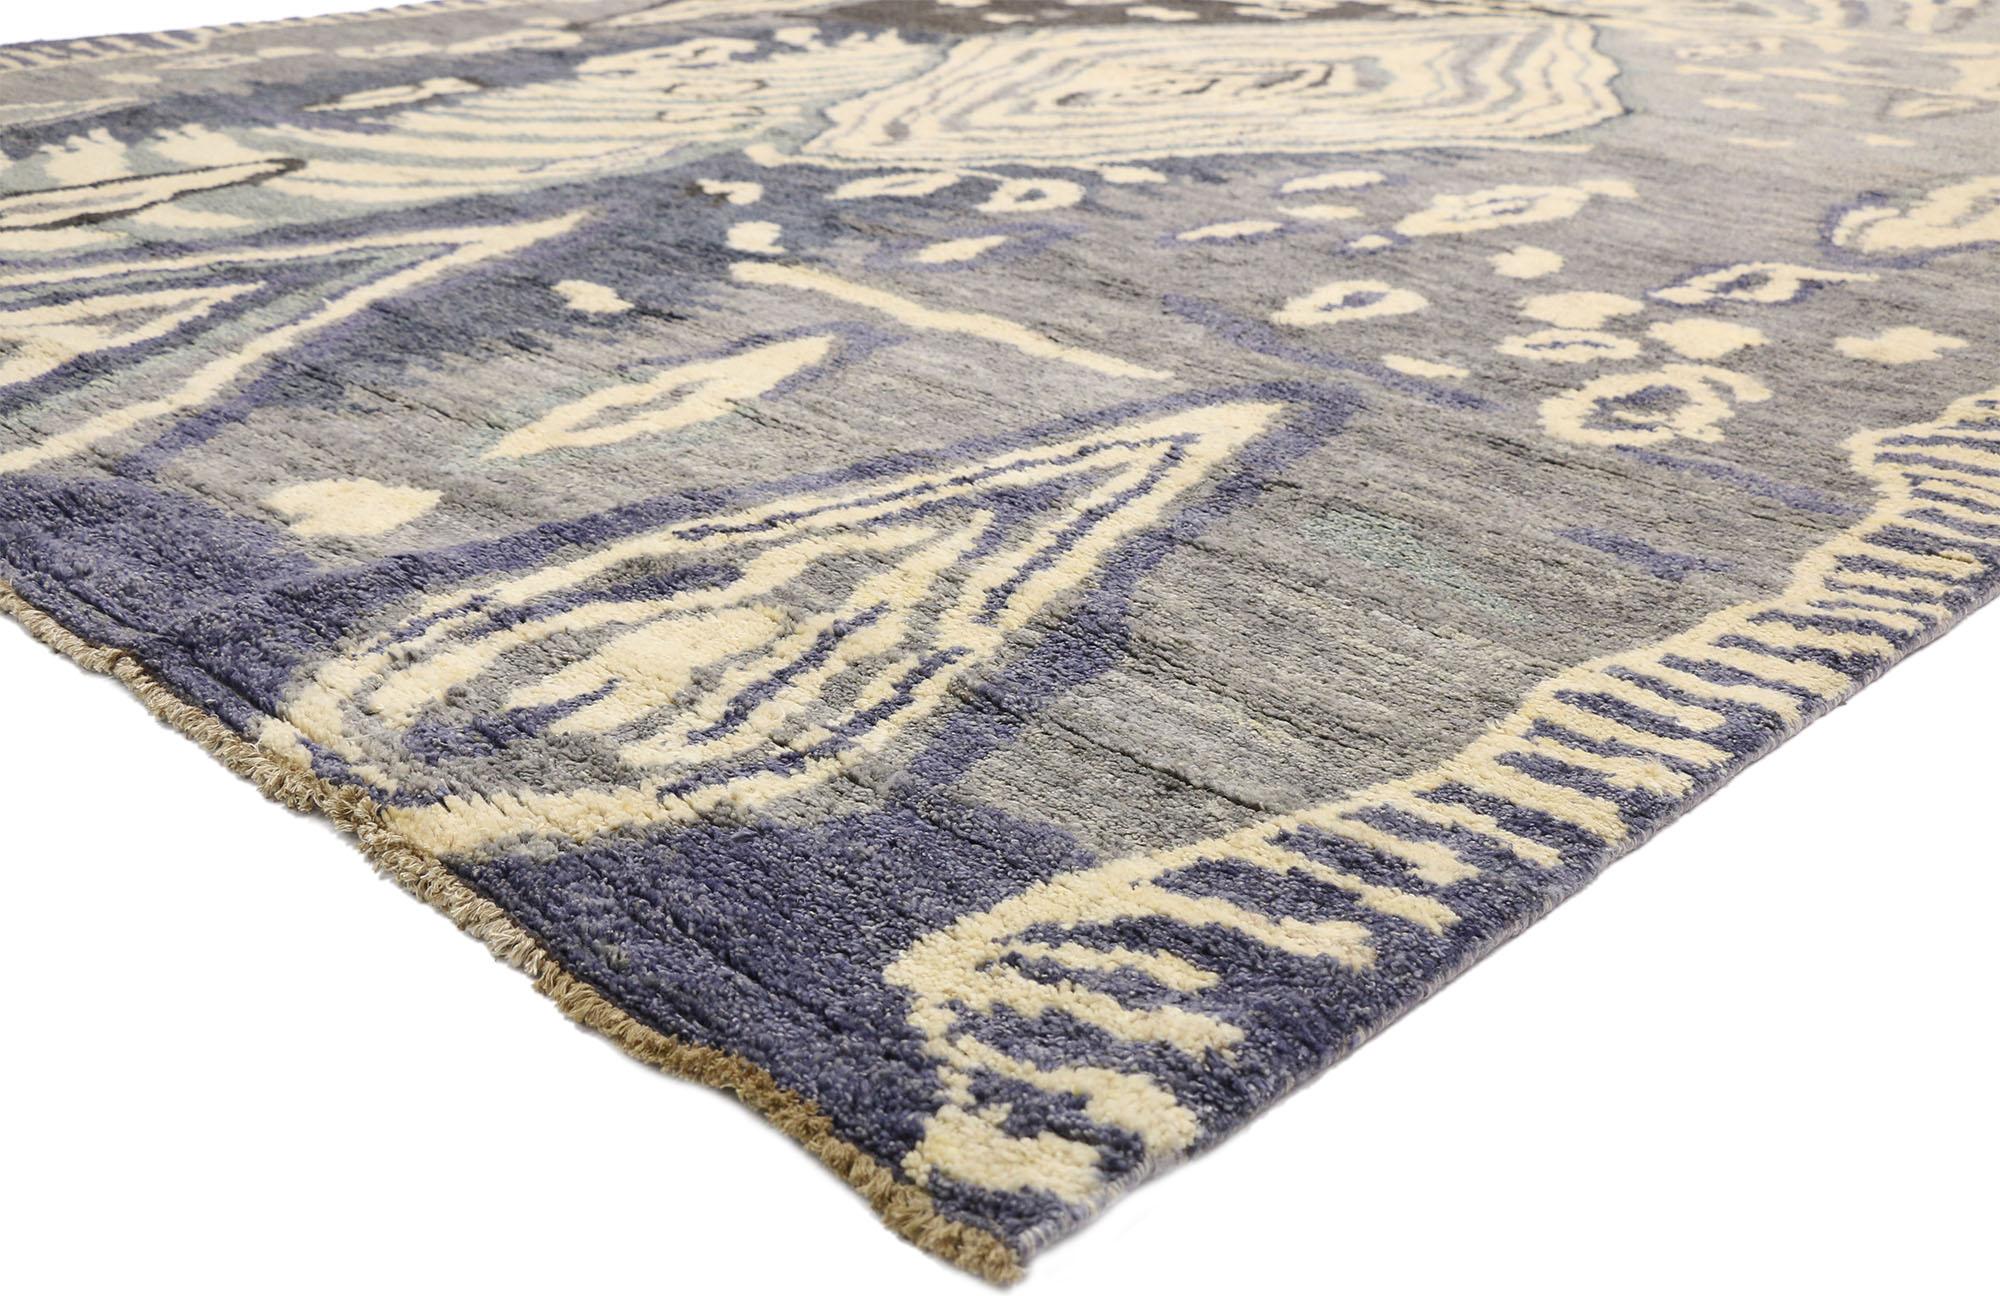 80475 Large Abstract Moroccan Rug, 10'06 x 13'11.
Reflecting esoteric elements with incredible detail and texture, this hand knotted wool large abstract Moroccan rug is a captivating vision of woven beauty. The avant-garde design and dramatic